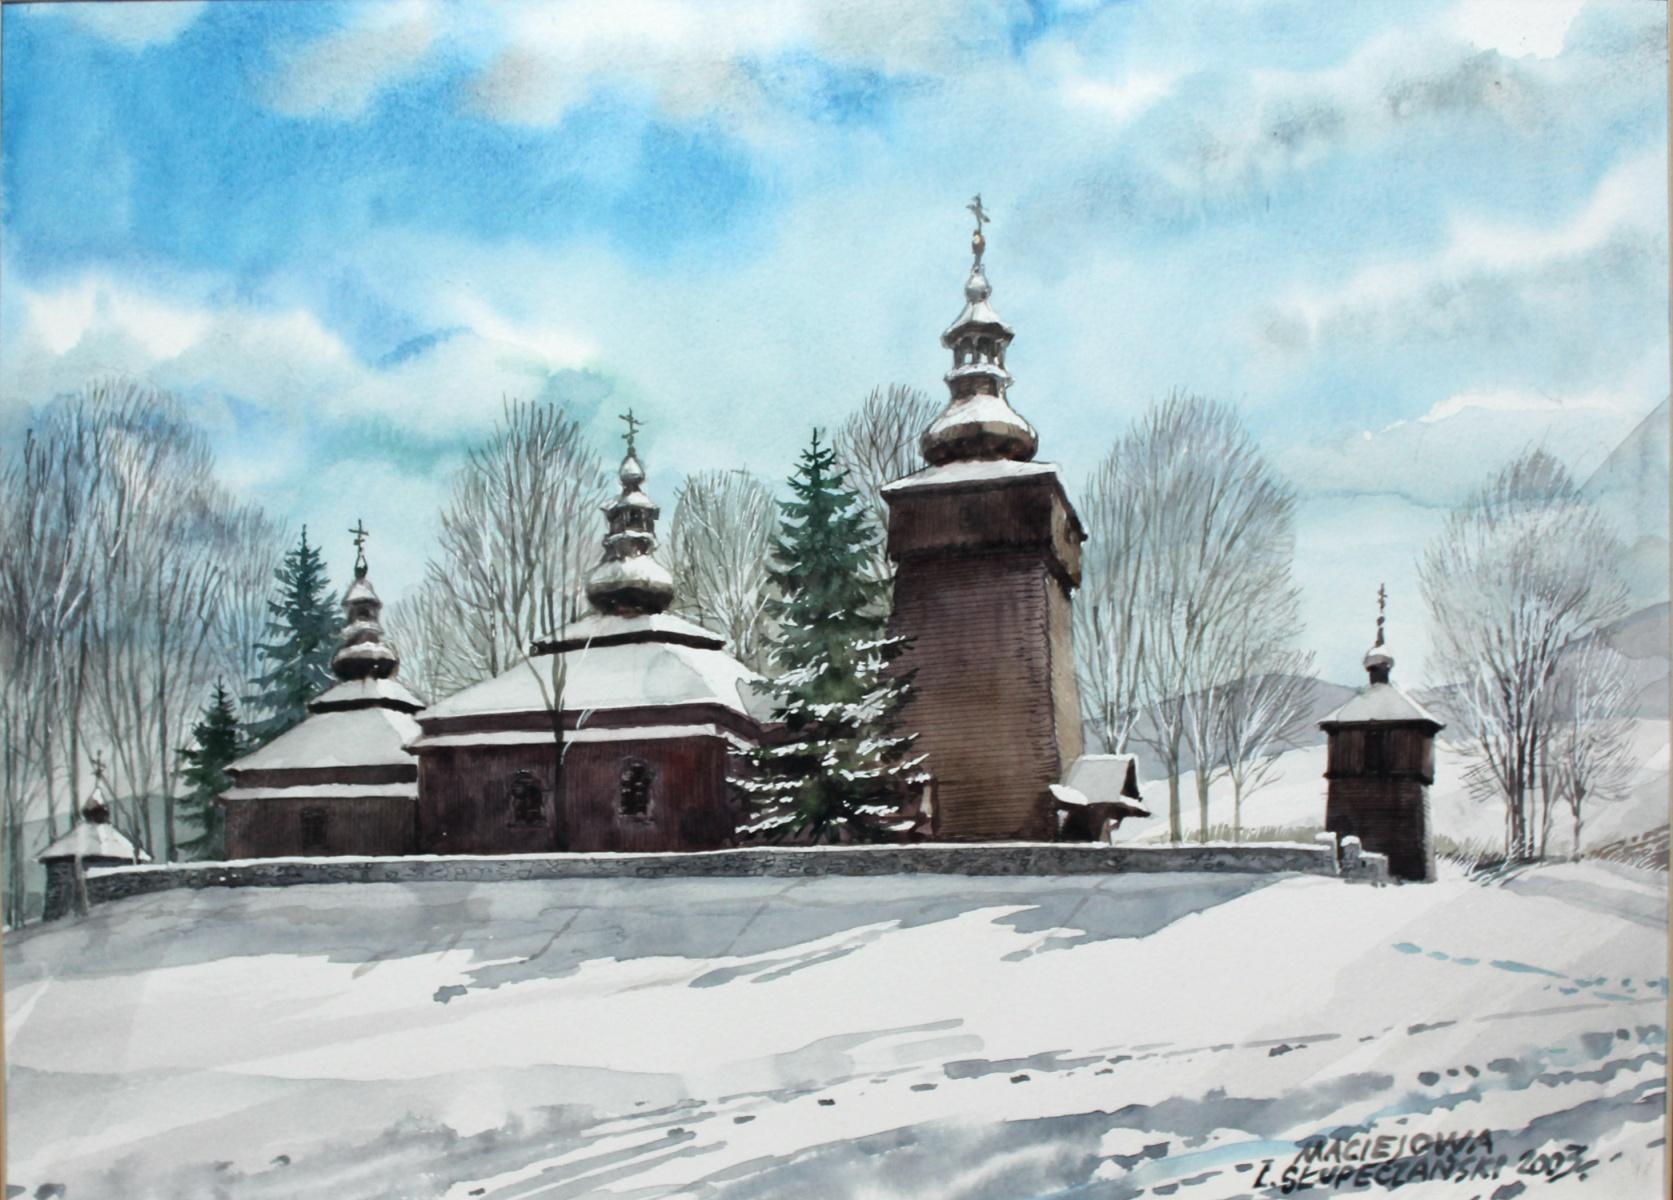 Maciejowa - Contemporary Watercolor Painting, Winter landscape, Realistic 